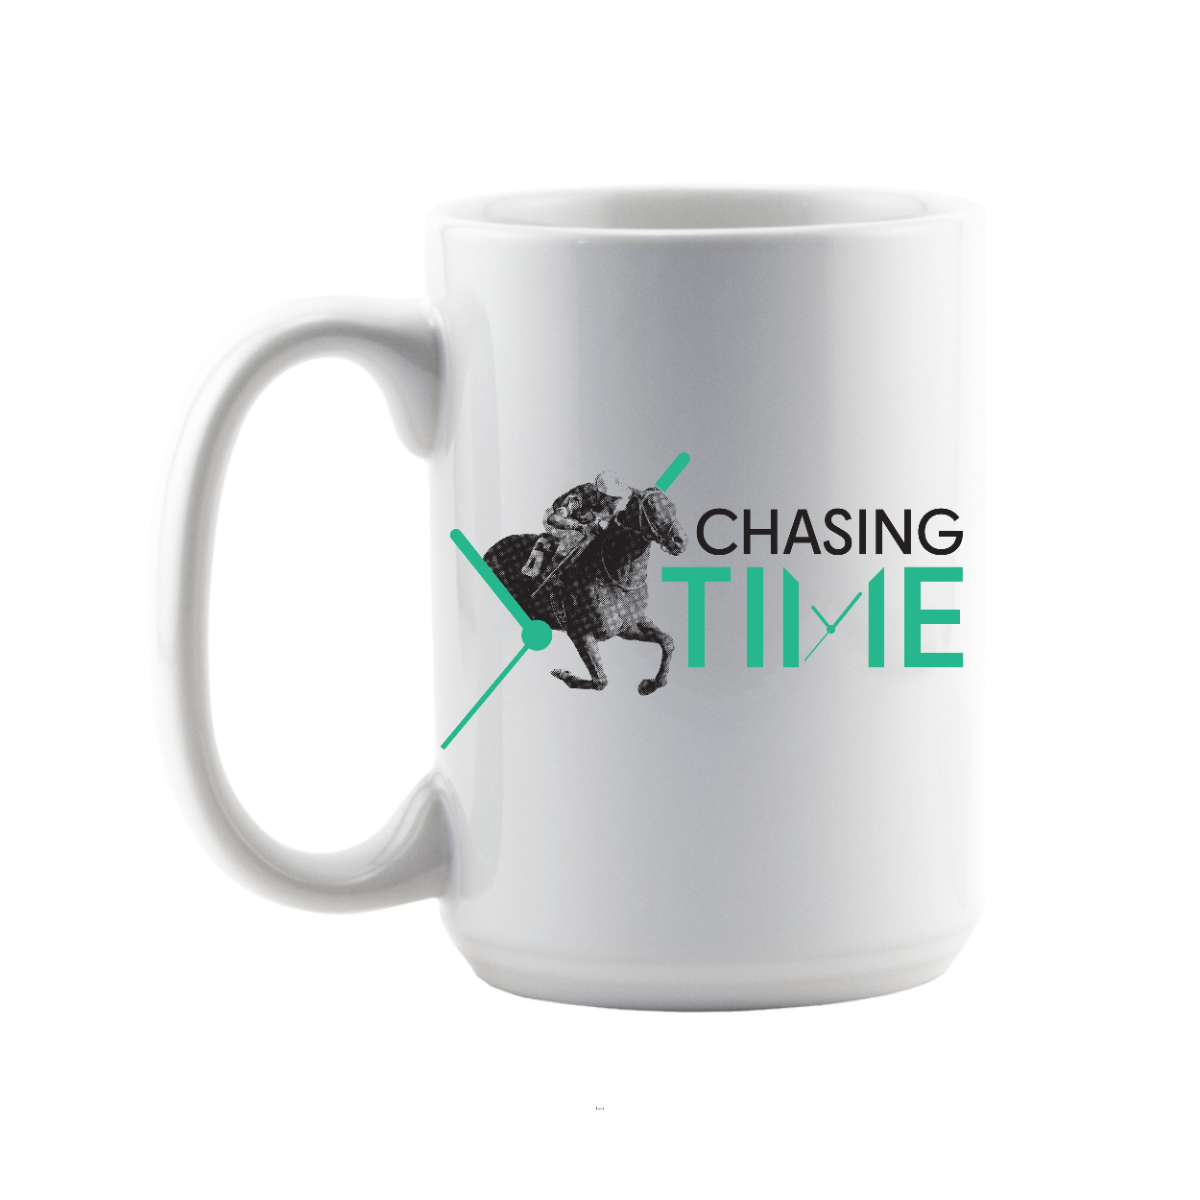 15 oz Chasing Time Coffee Cup